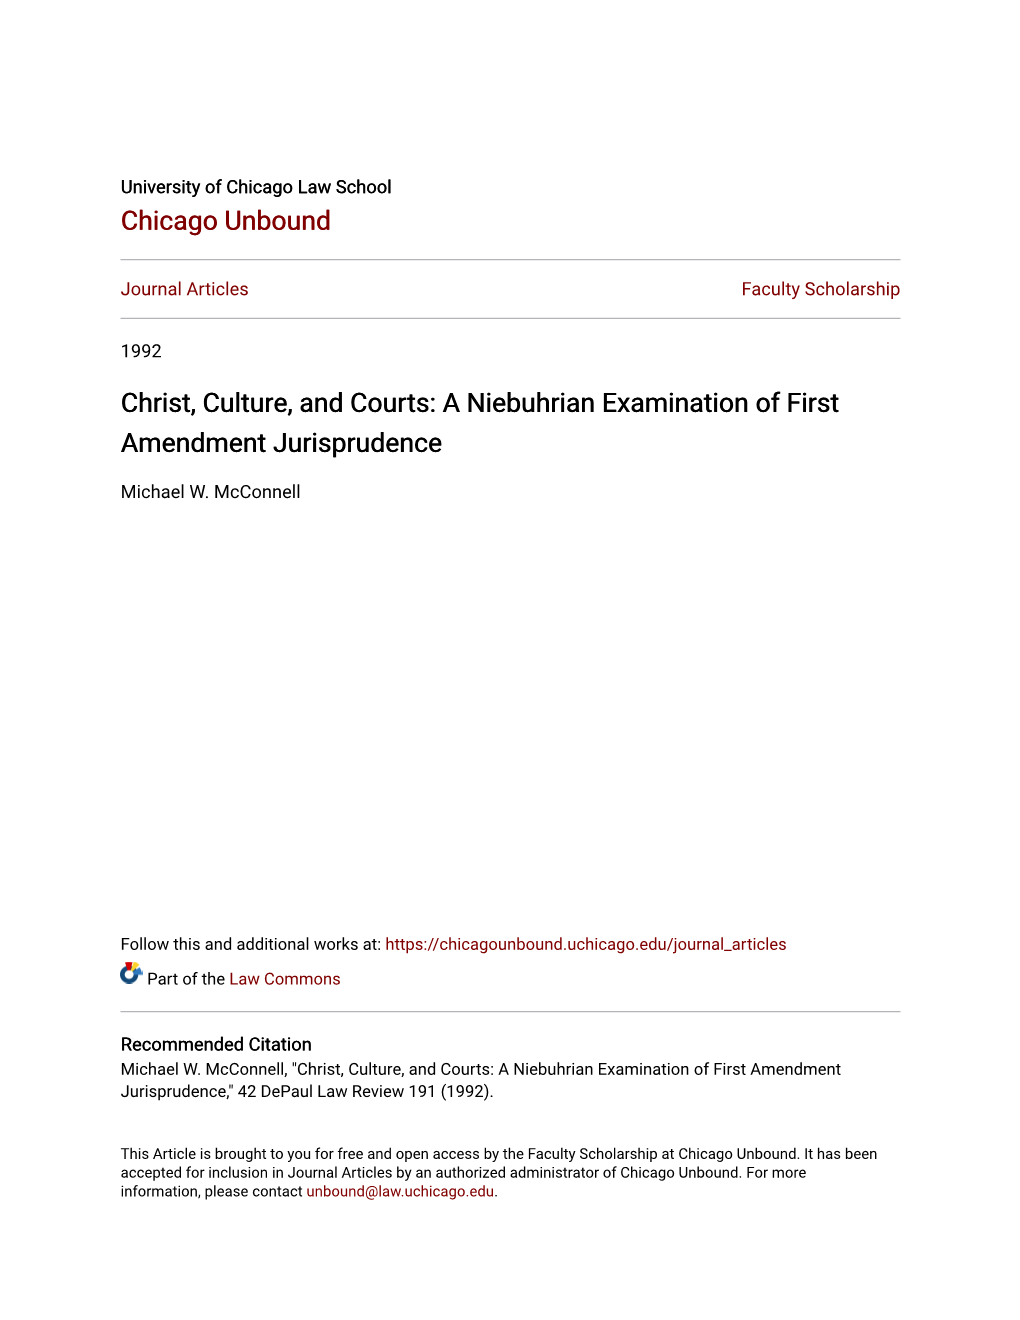 Christ, Culture, and Courts: a Niebuhrian Examination of First Amendment Jurisprudence